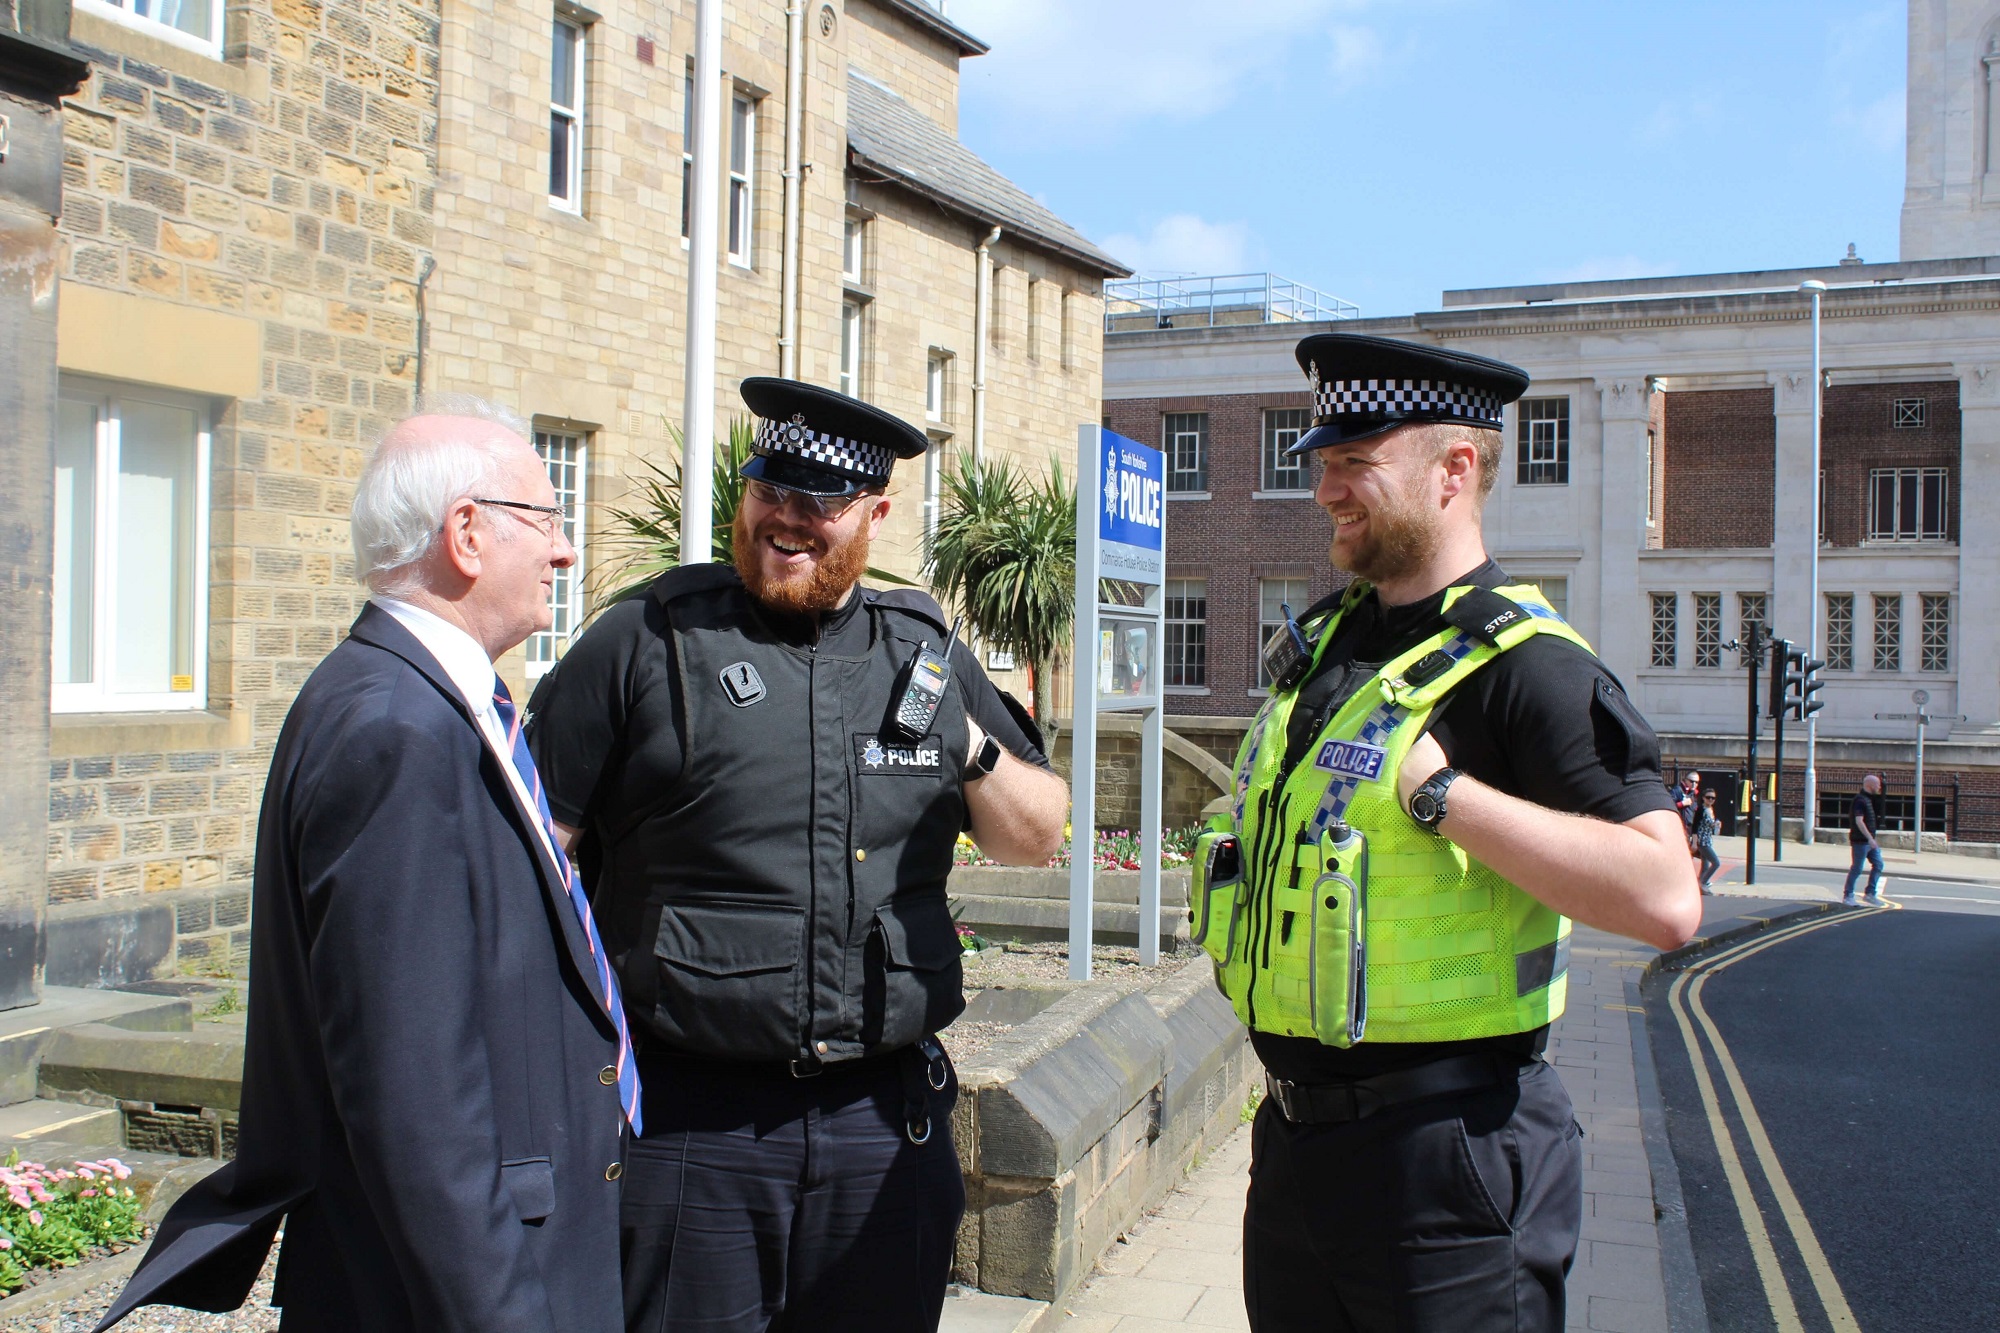 Dr Alan Billings speaks with two police officers